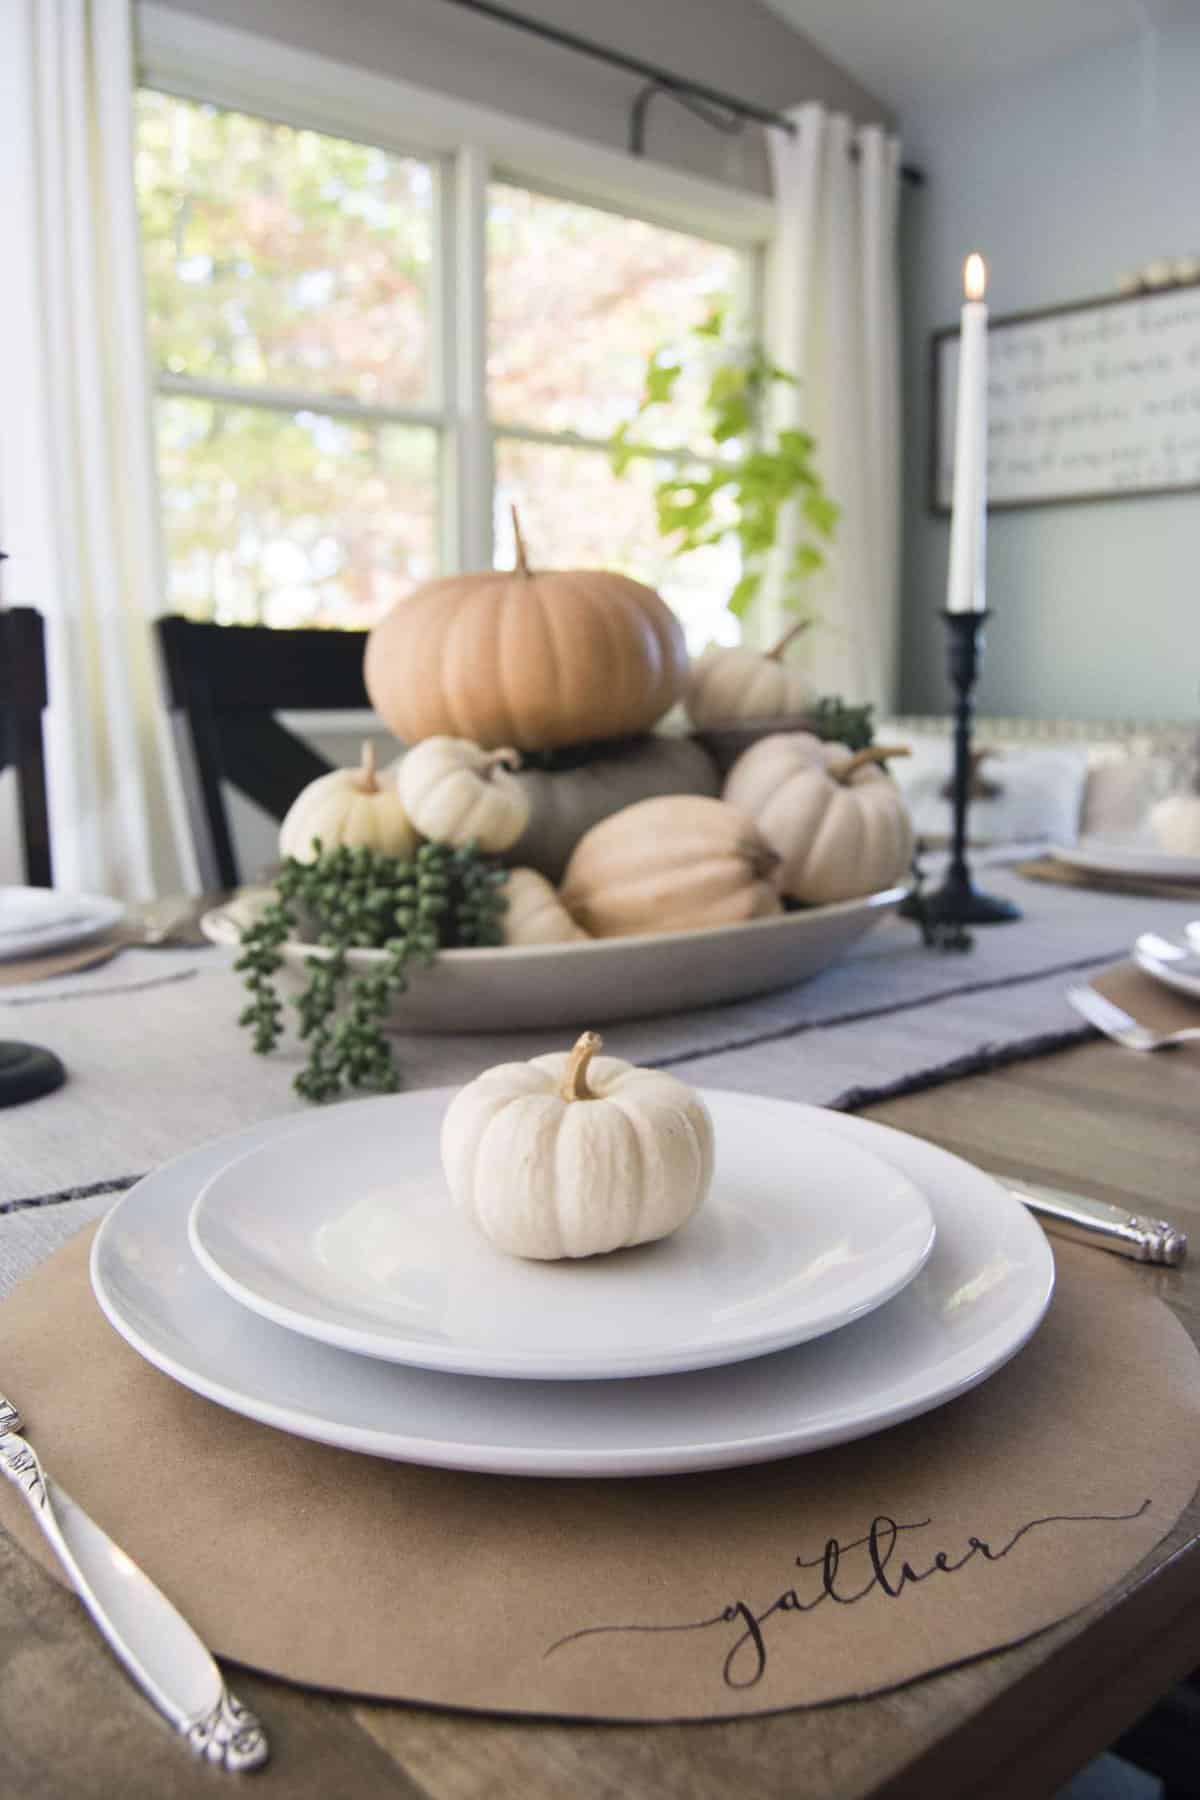 Are you looking for a simple way to decorate your thanksgiving table? I've put together three easy options to dress up your thanksgiving tablescape.